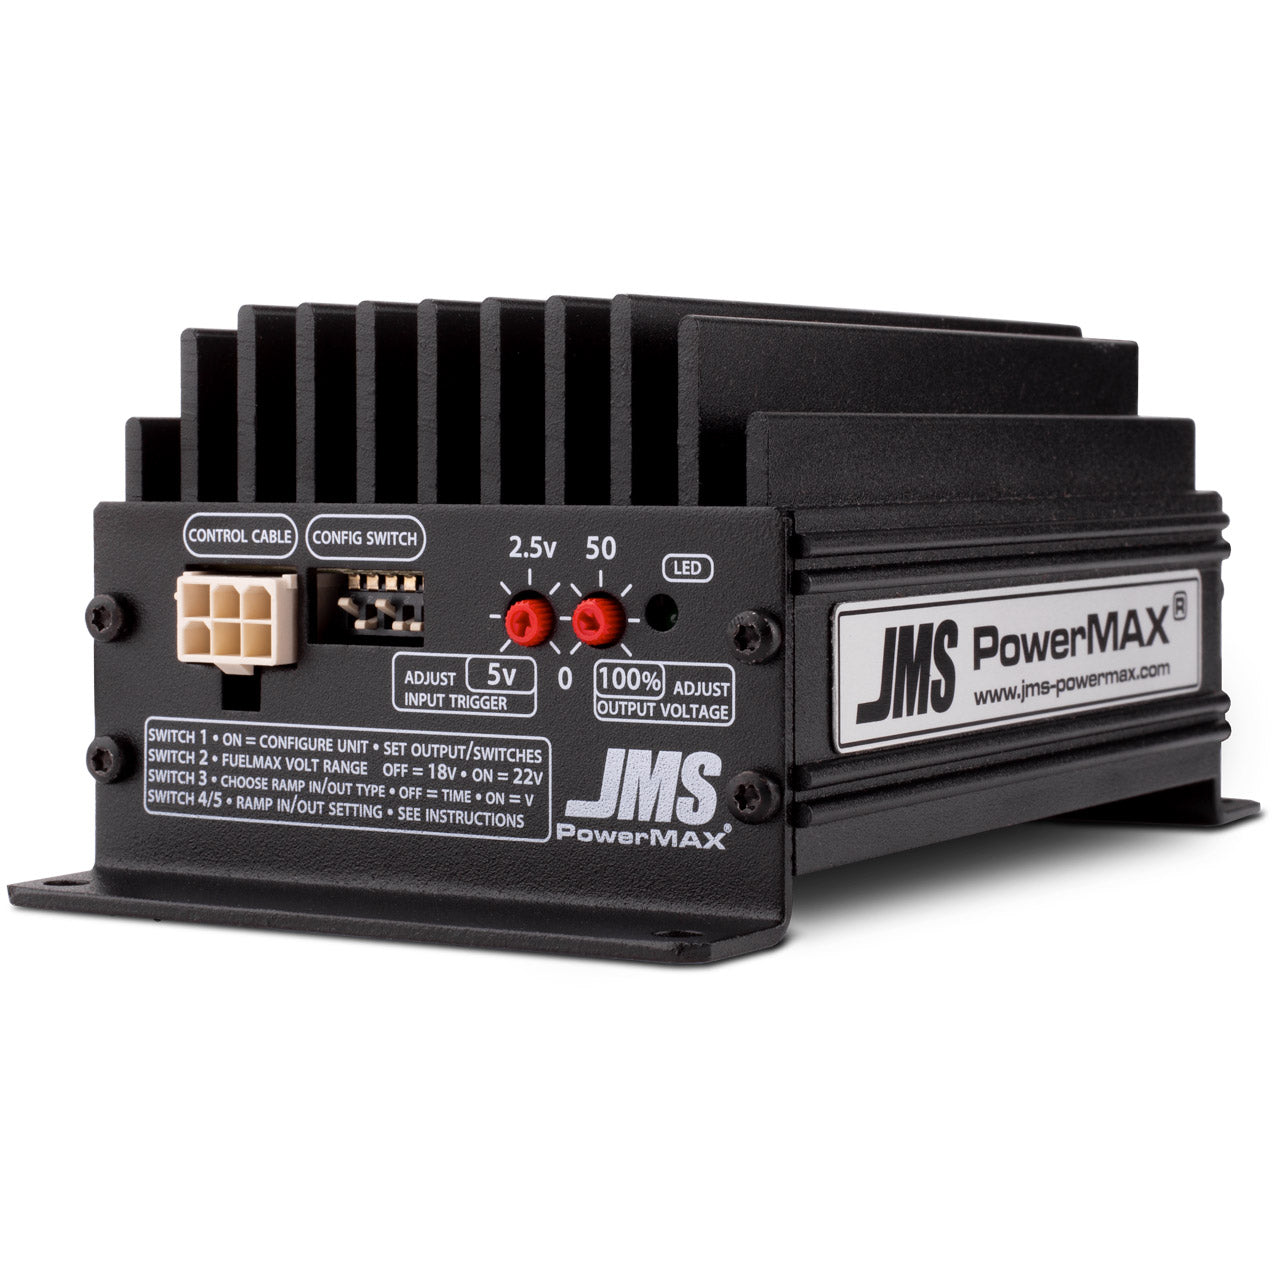 JMS FuelMAX - Fuel Pump Voltage Booster V2 - Plug and Play Single Output (Activation - MAF/MAP/TPS or Ground includes Ext pressure switch) P2000PPJ19